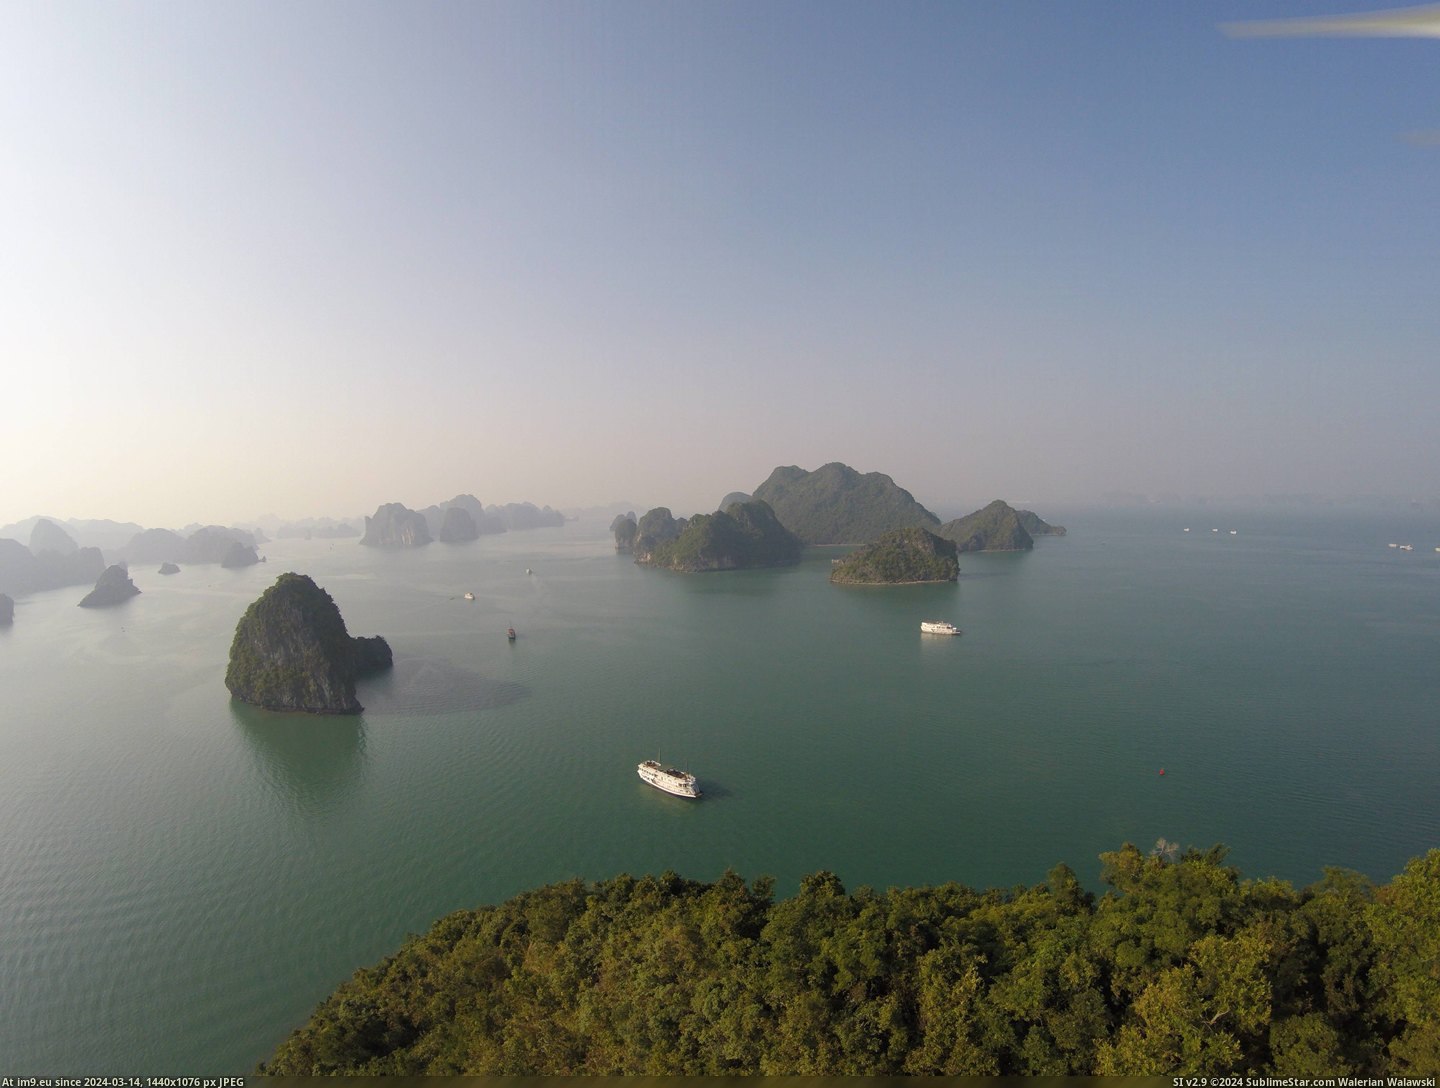 #Lost #Gorgeous #Result #Vietnam #Drone #Bay #4000x3000 #Control [Earthporn] Lost control of my drone in Halong Bay in Vietnam, the result was gorgeous [4000x3000] Pic. (Изображение из альбом My r/EARTHPORN favs))